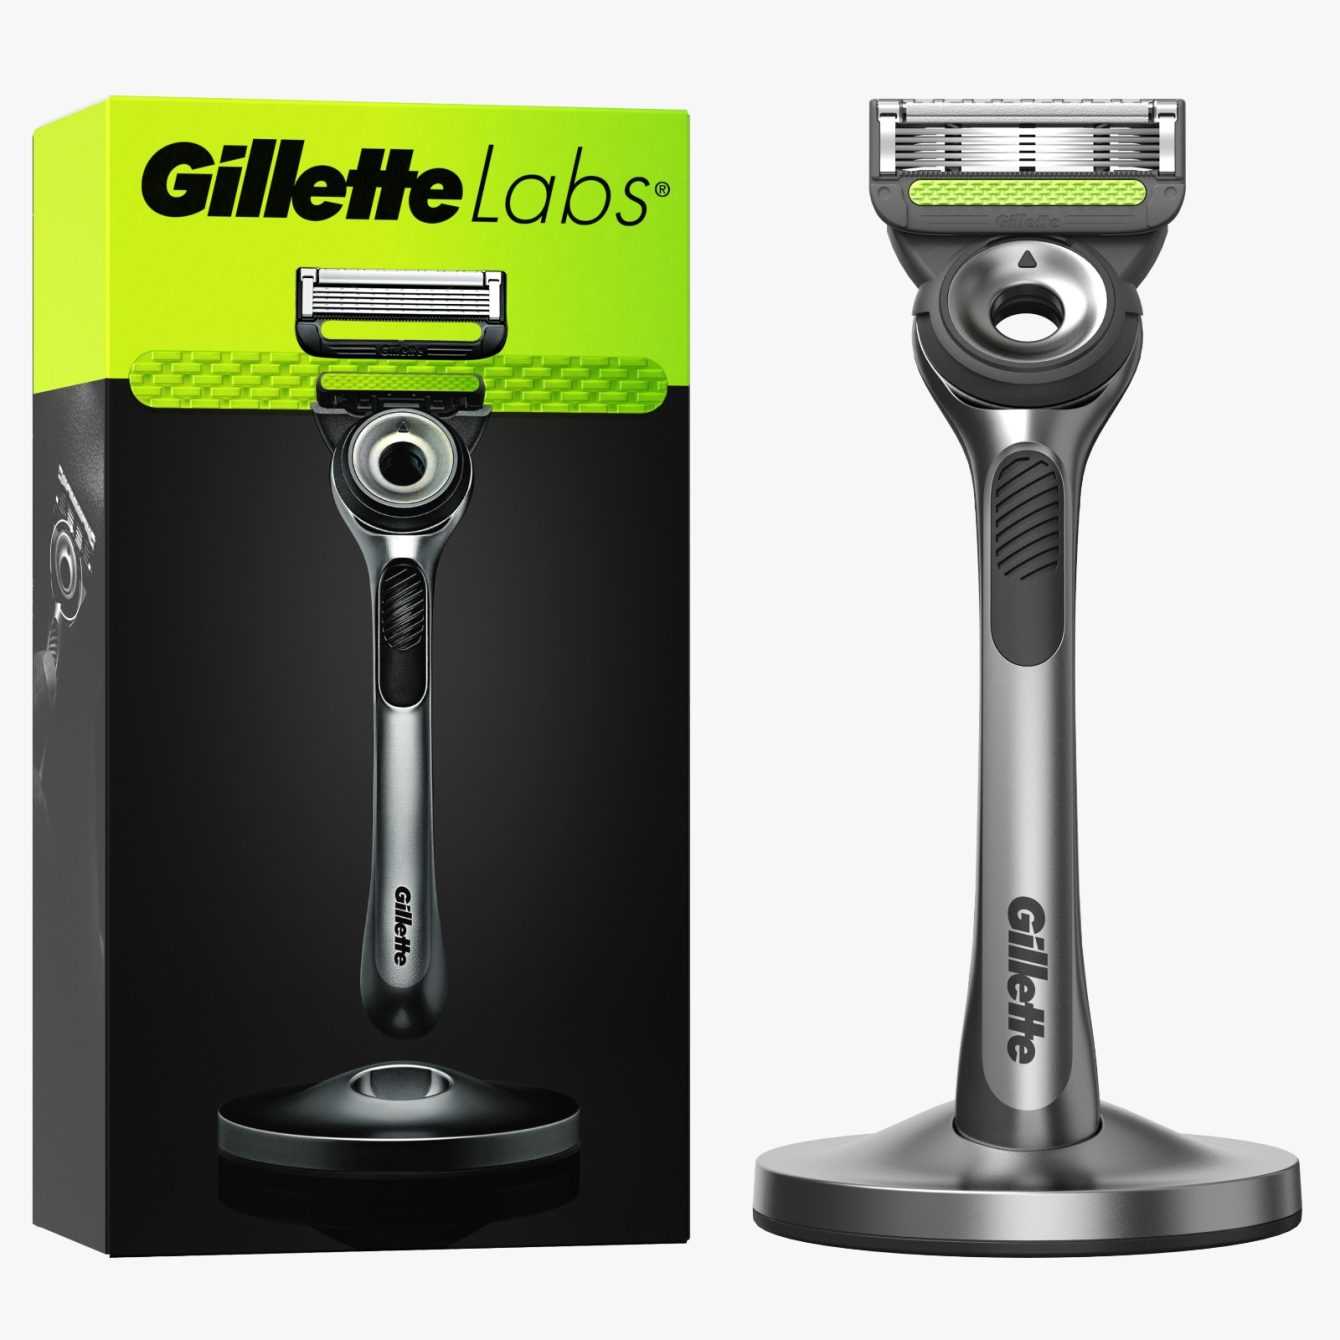 Gillette Labs: Writing a new chapter in the elevated shaving experience